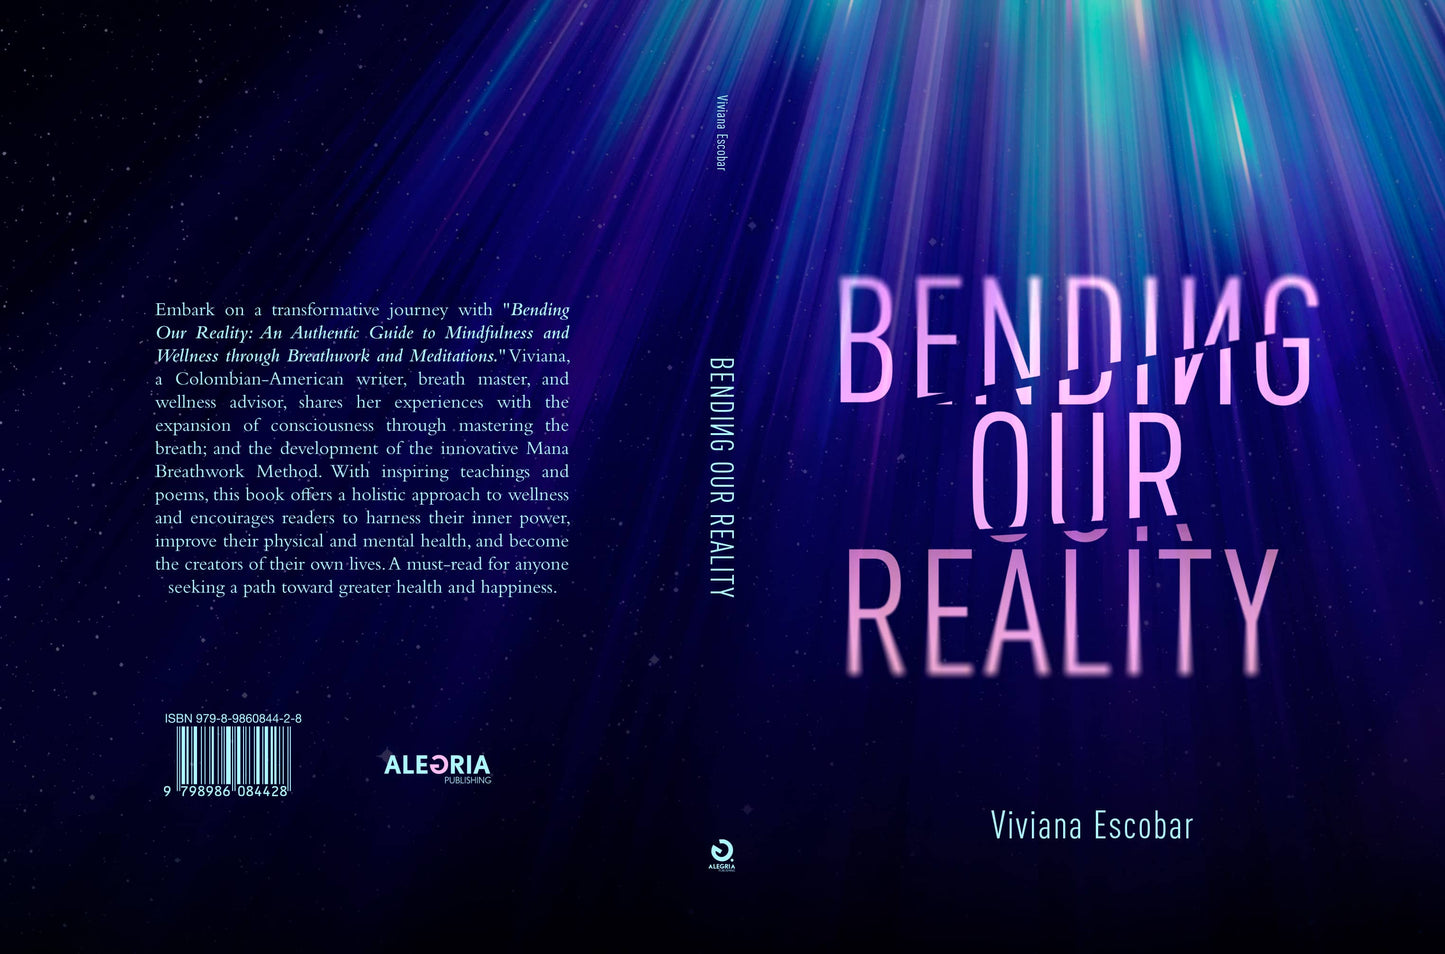 BENDING OUR REALITY